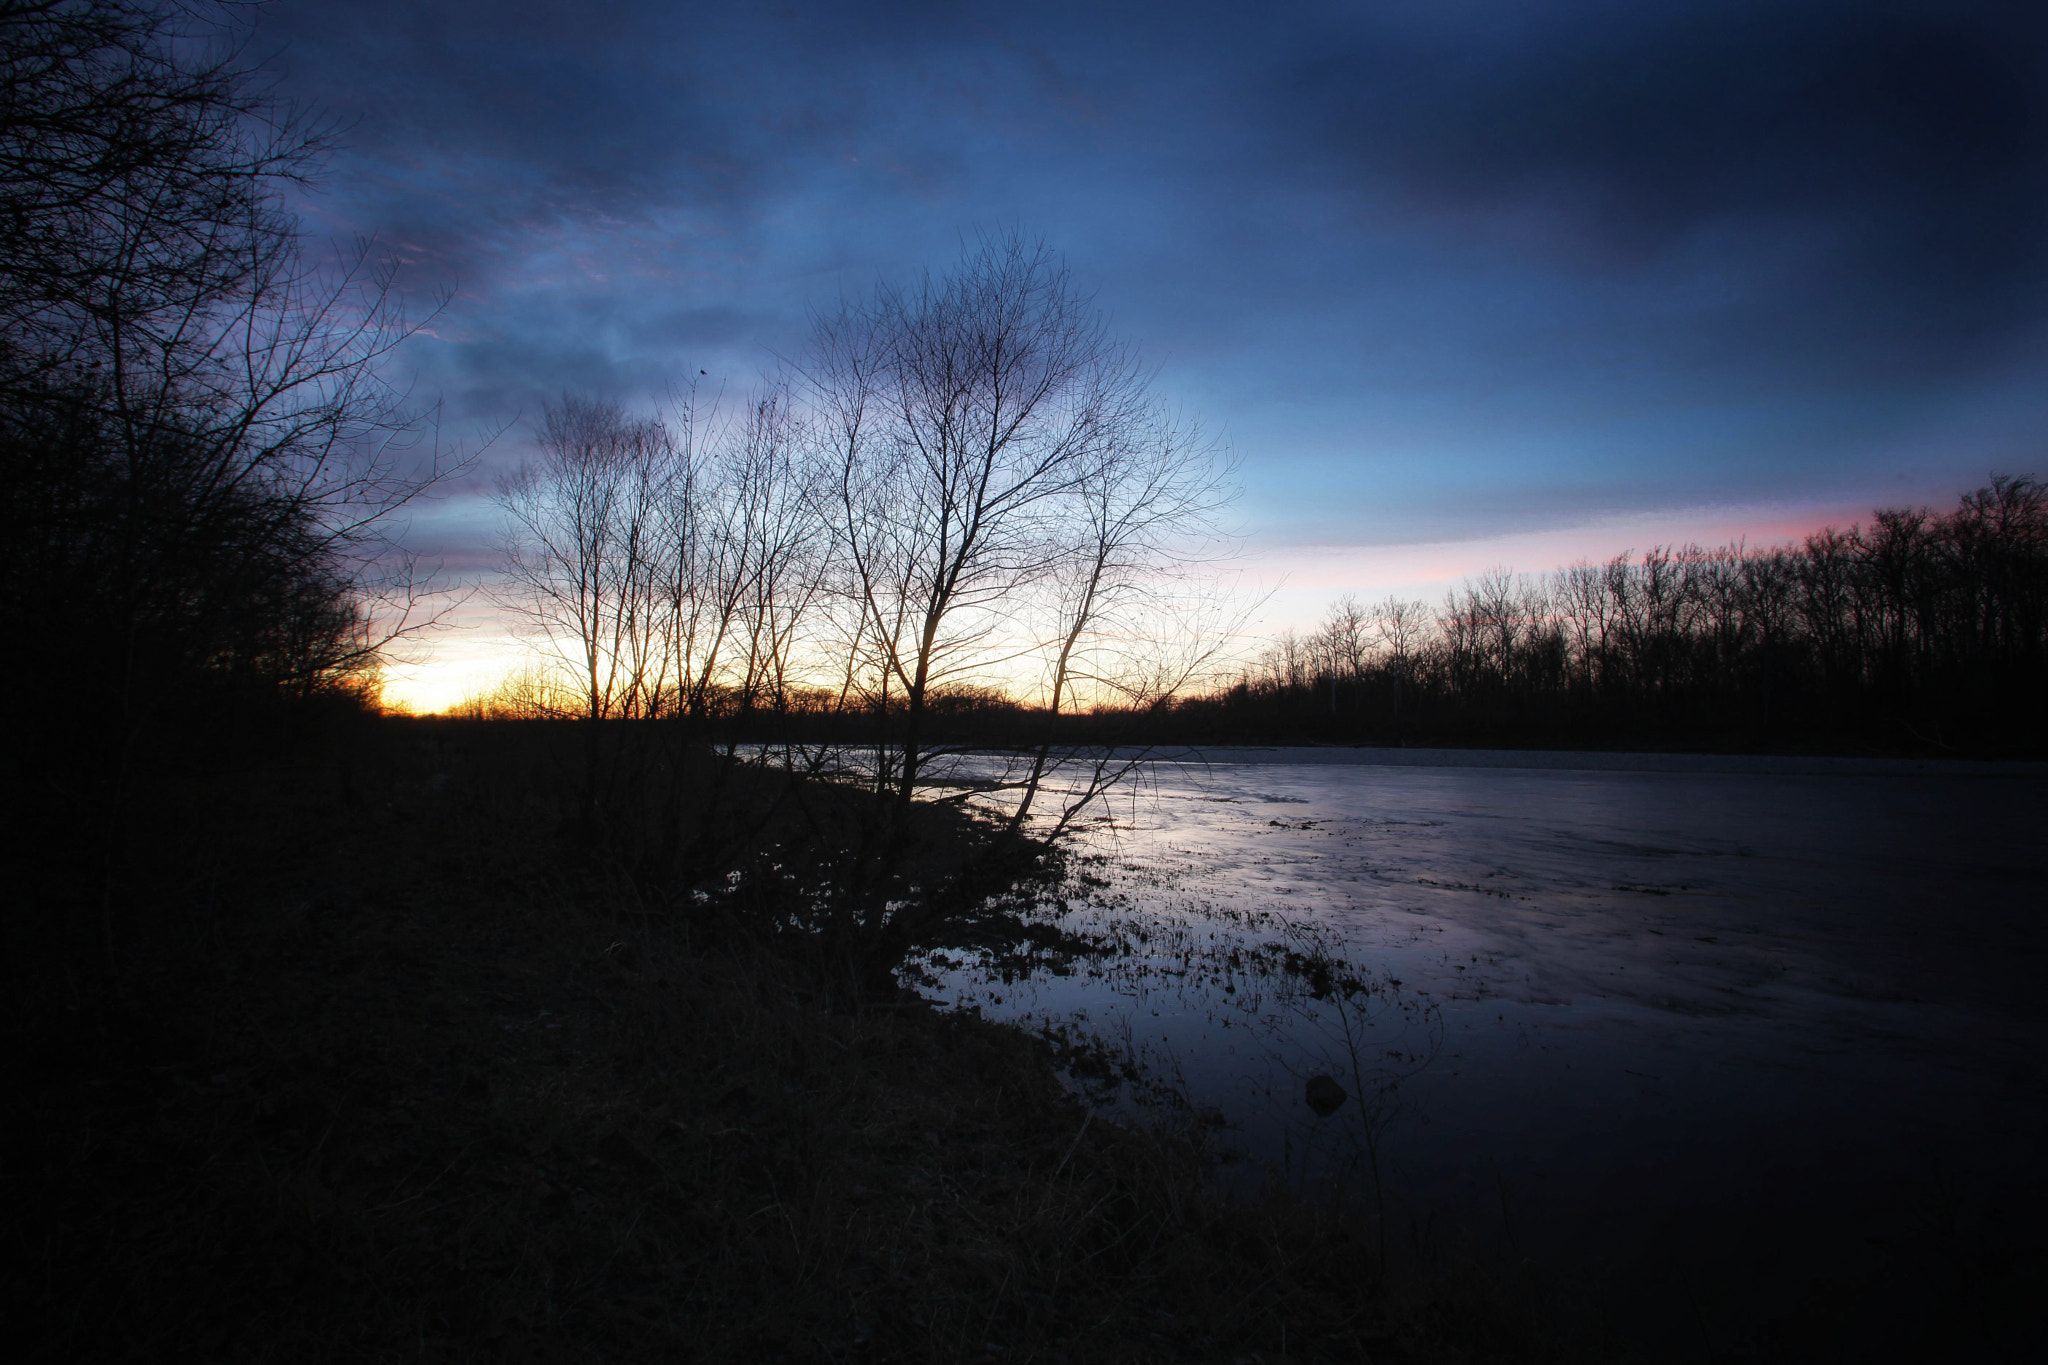 Authentic - Fading winter sunset light over Great Miami River near ...